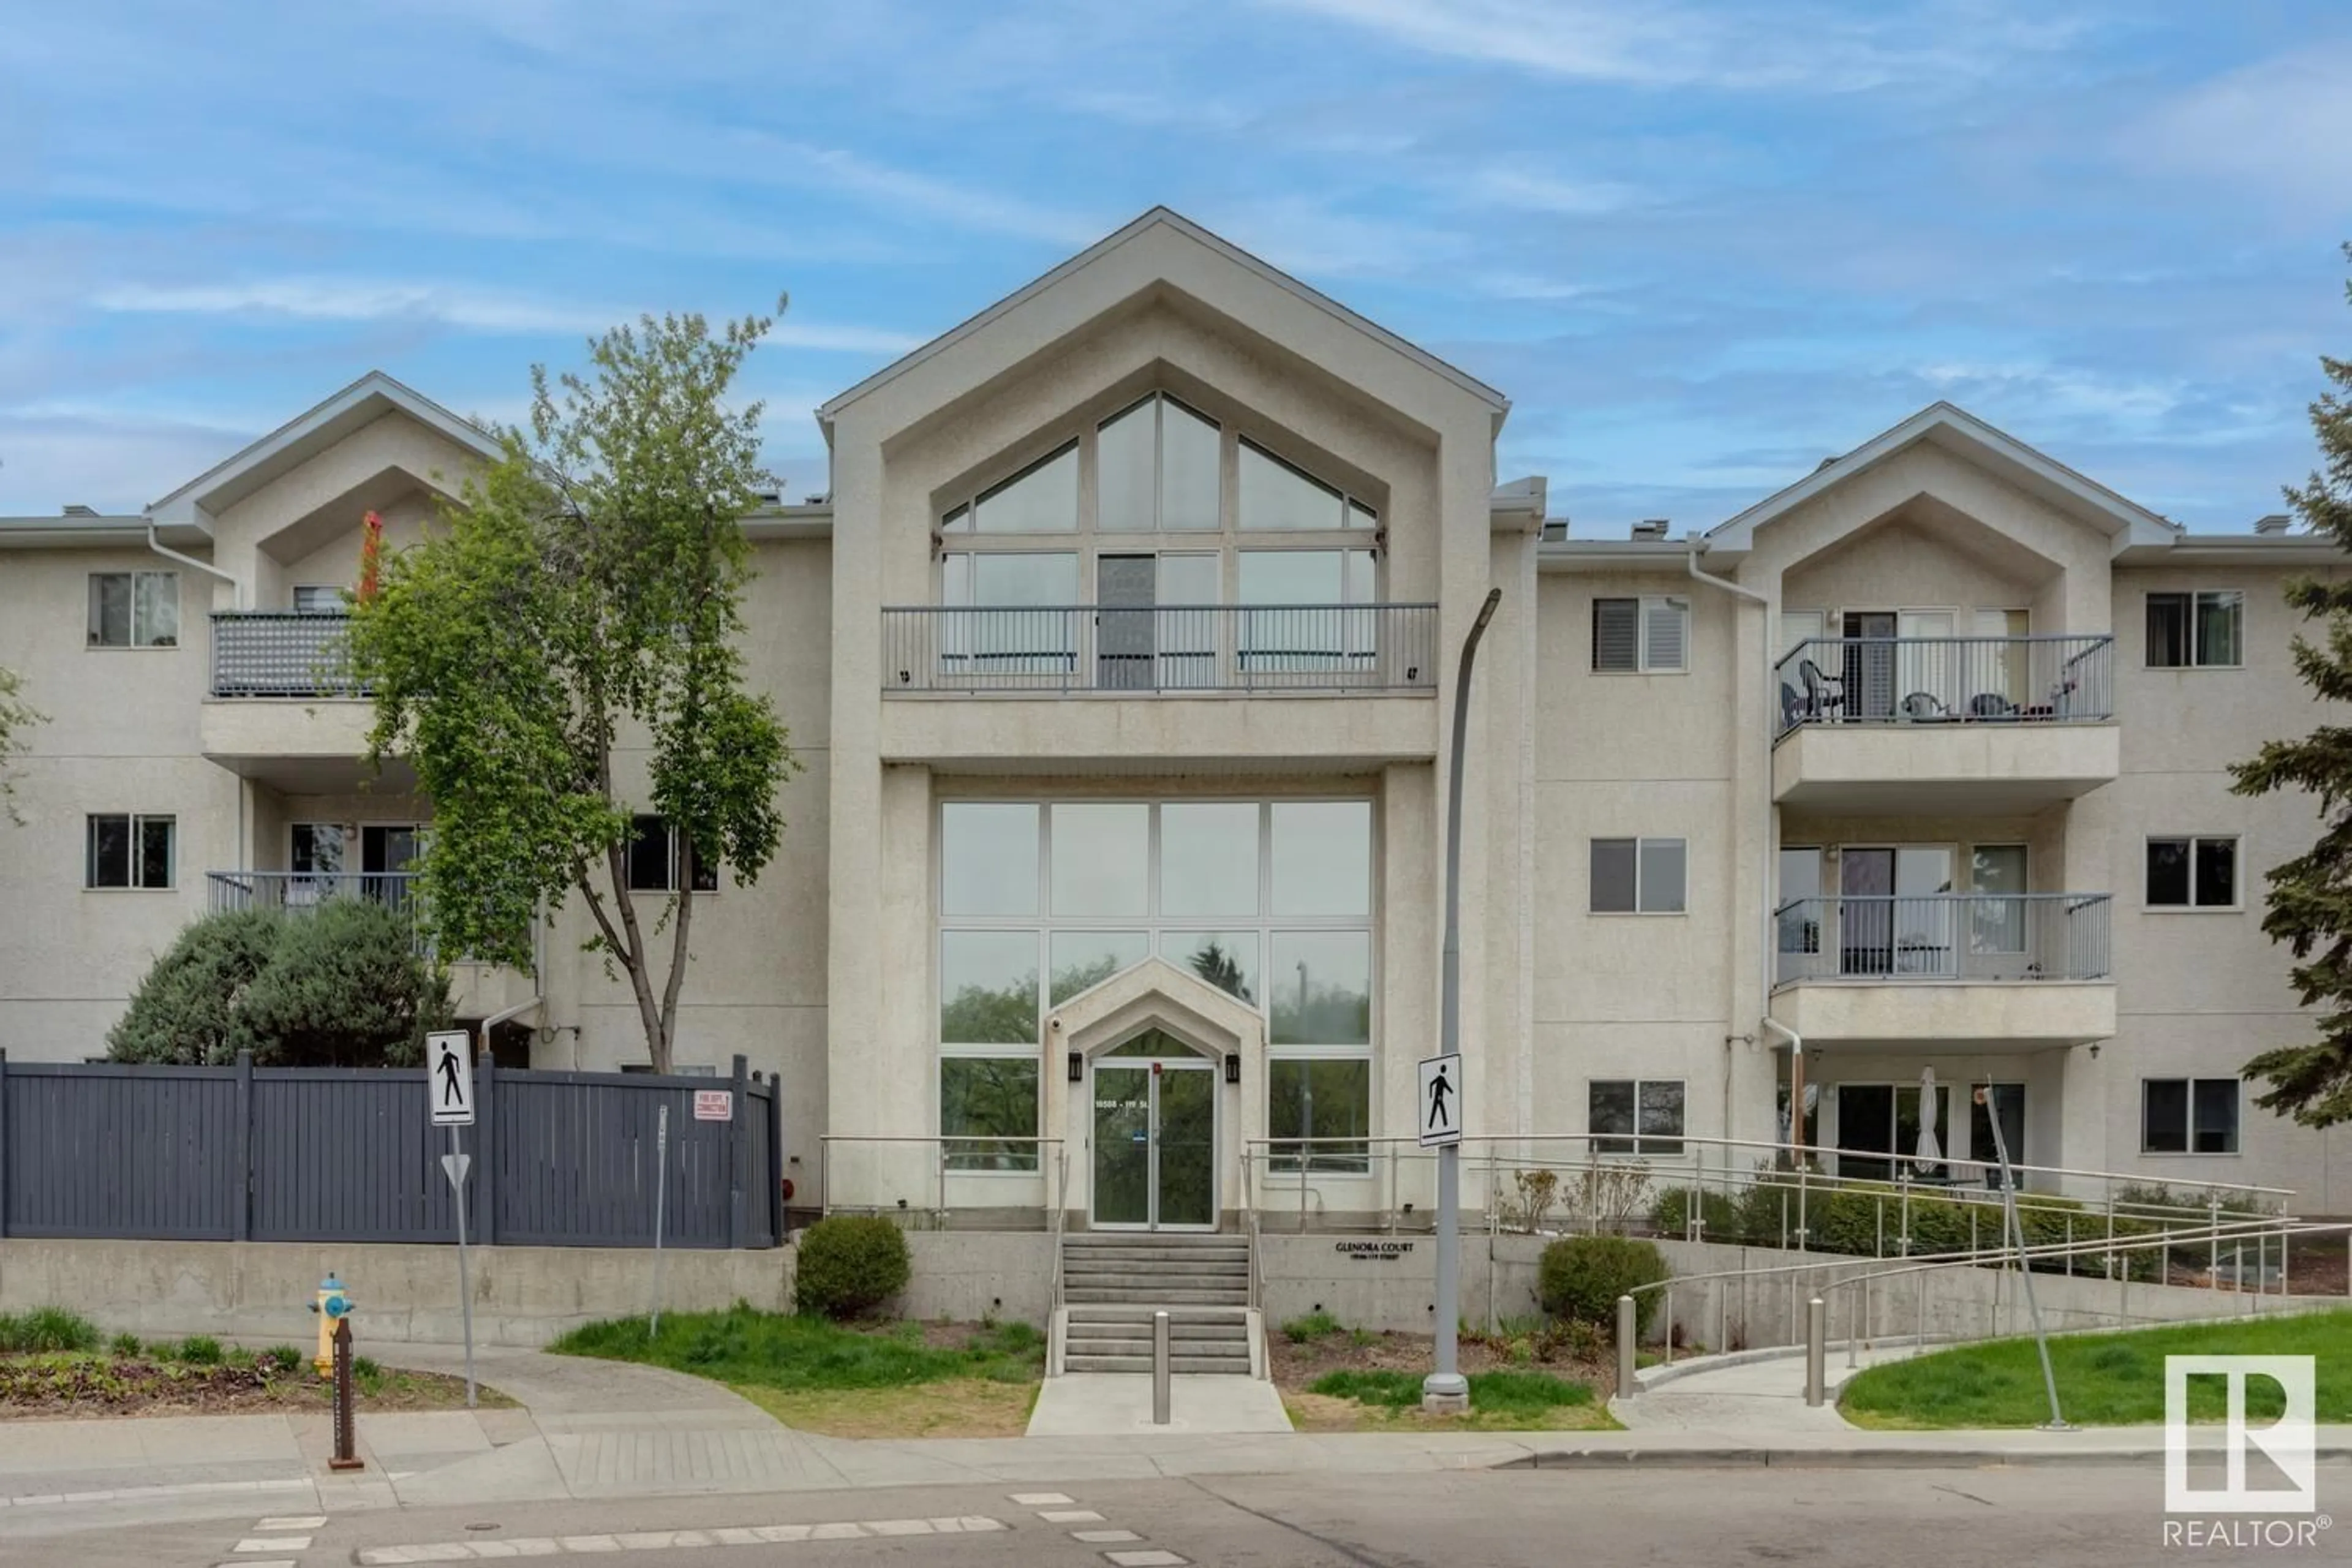 A pic from exterior of the house or condo for #119 10508 119 ST NW, Edmonton Alberta T5H4M1